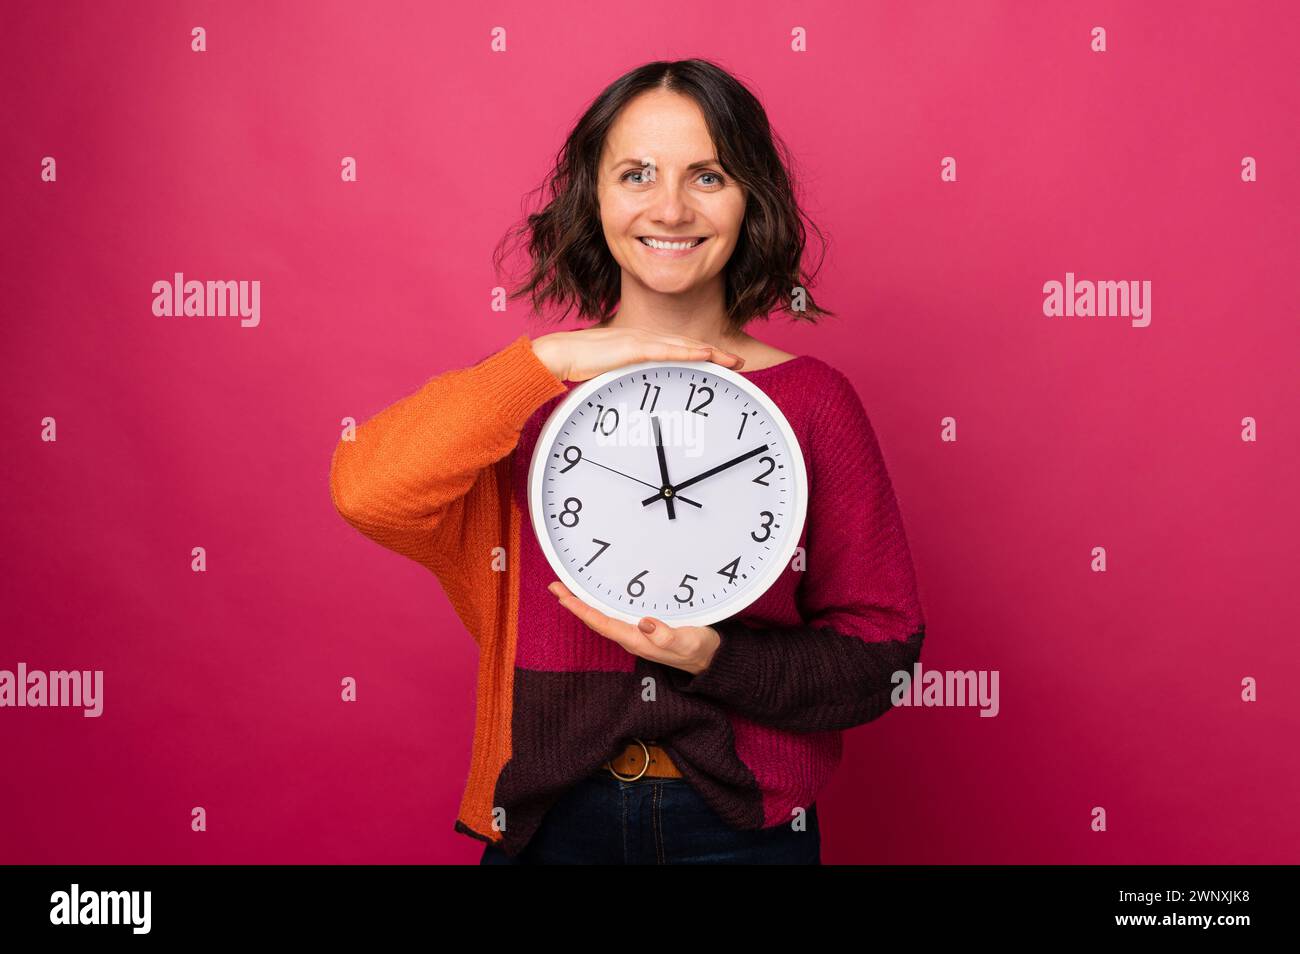 Studio portrait of a beautiful smiling middle age woman holding a round clock over pink background. Stock Photo